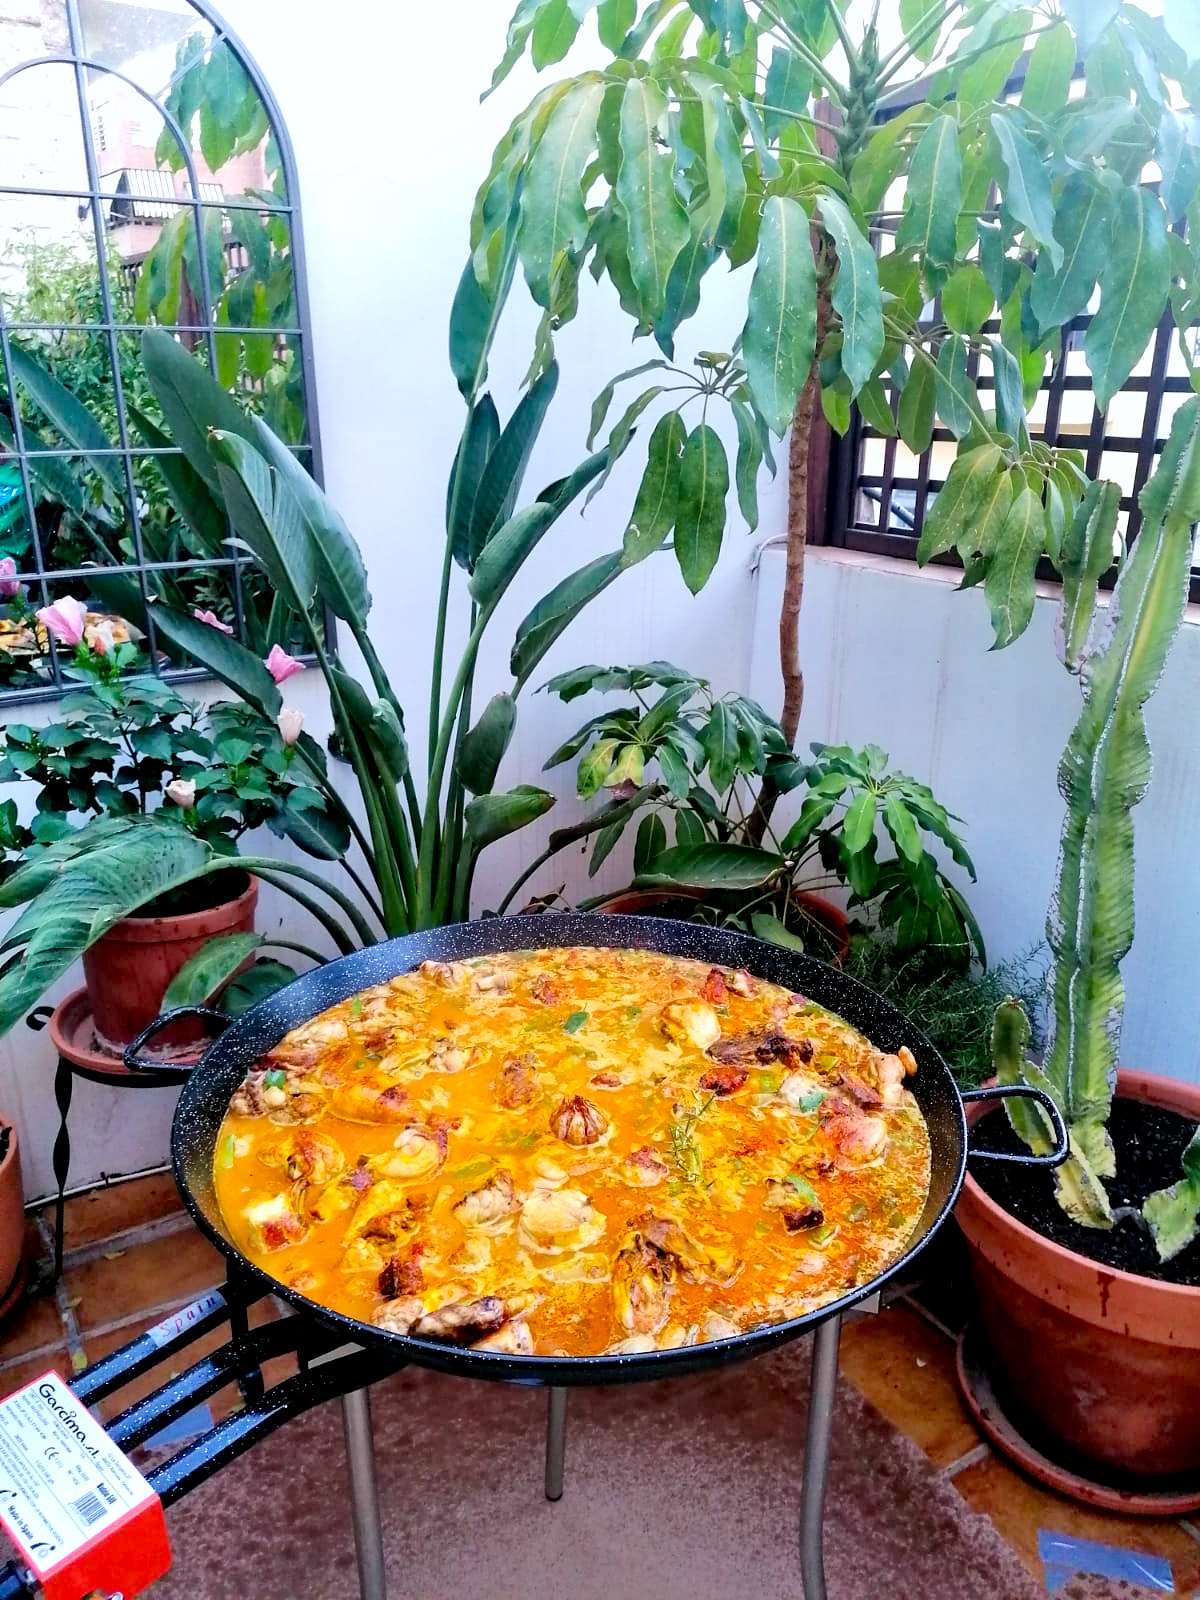 Paella cooking outdoors on an open fire (a hob) in Spain.